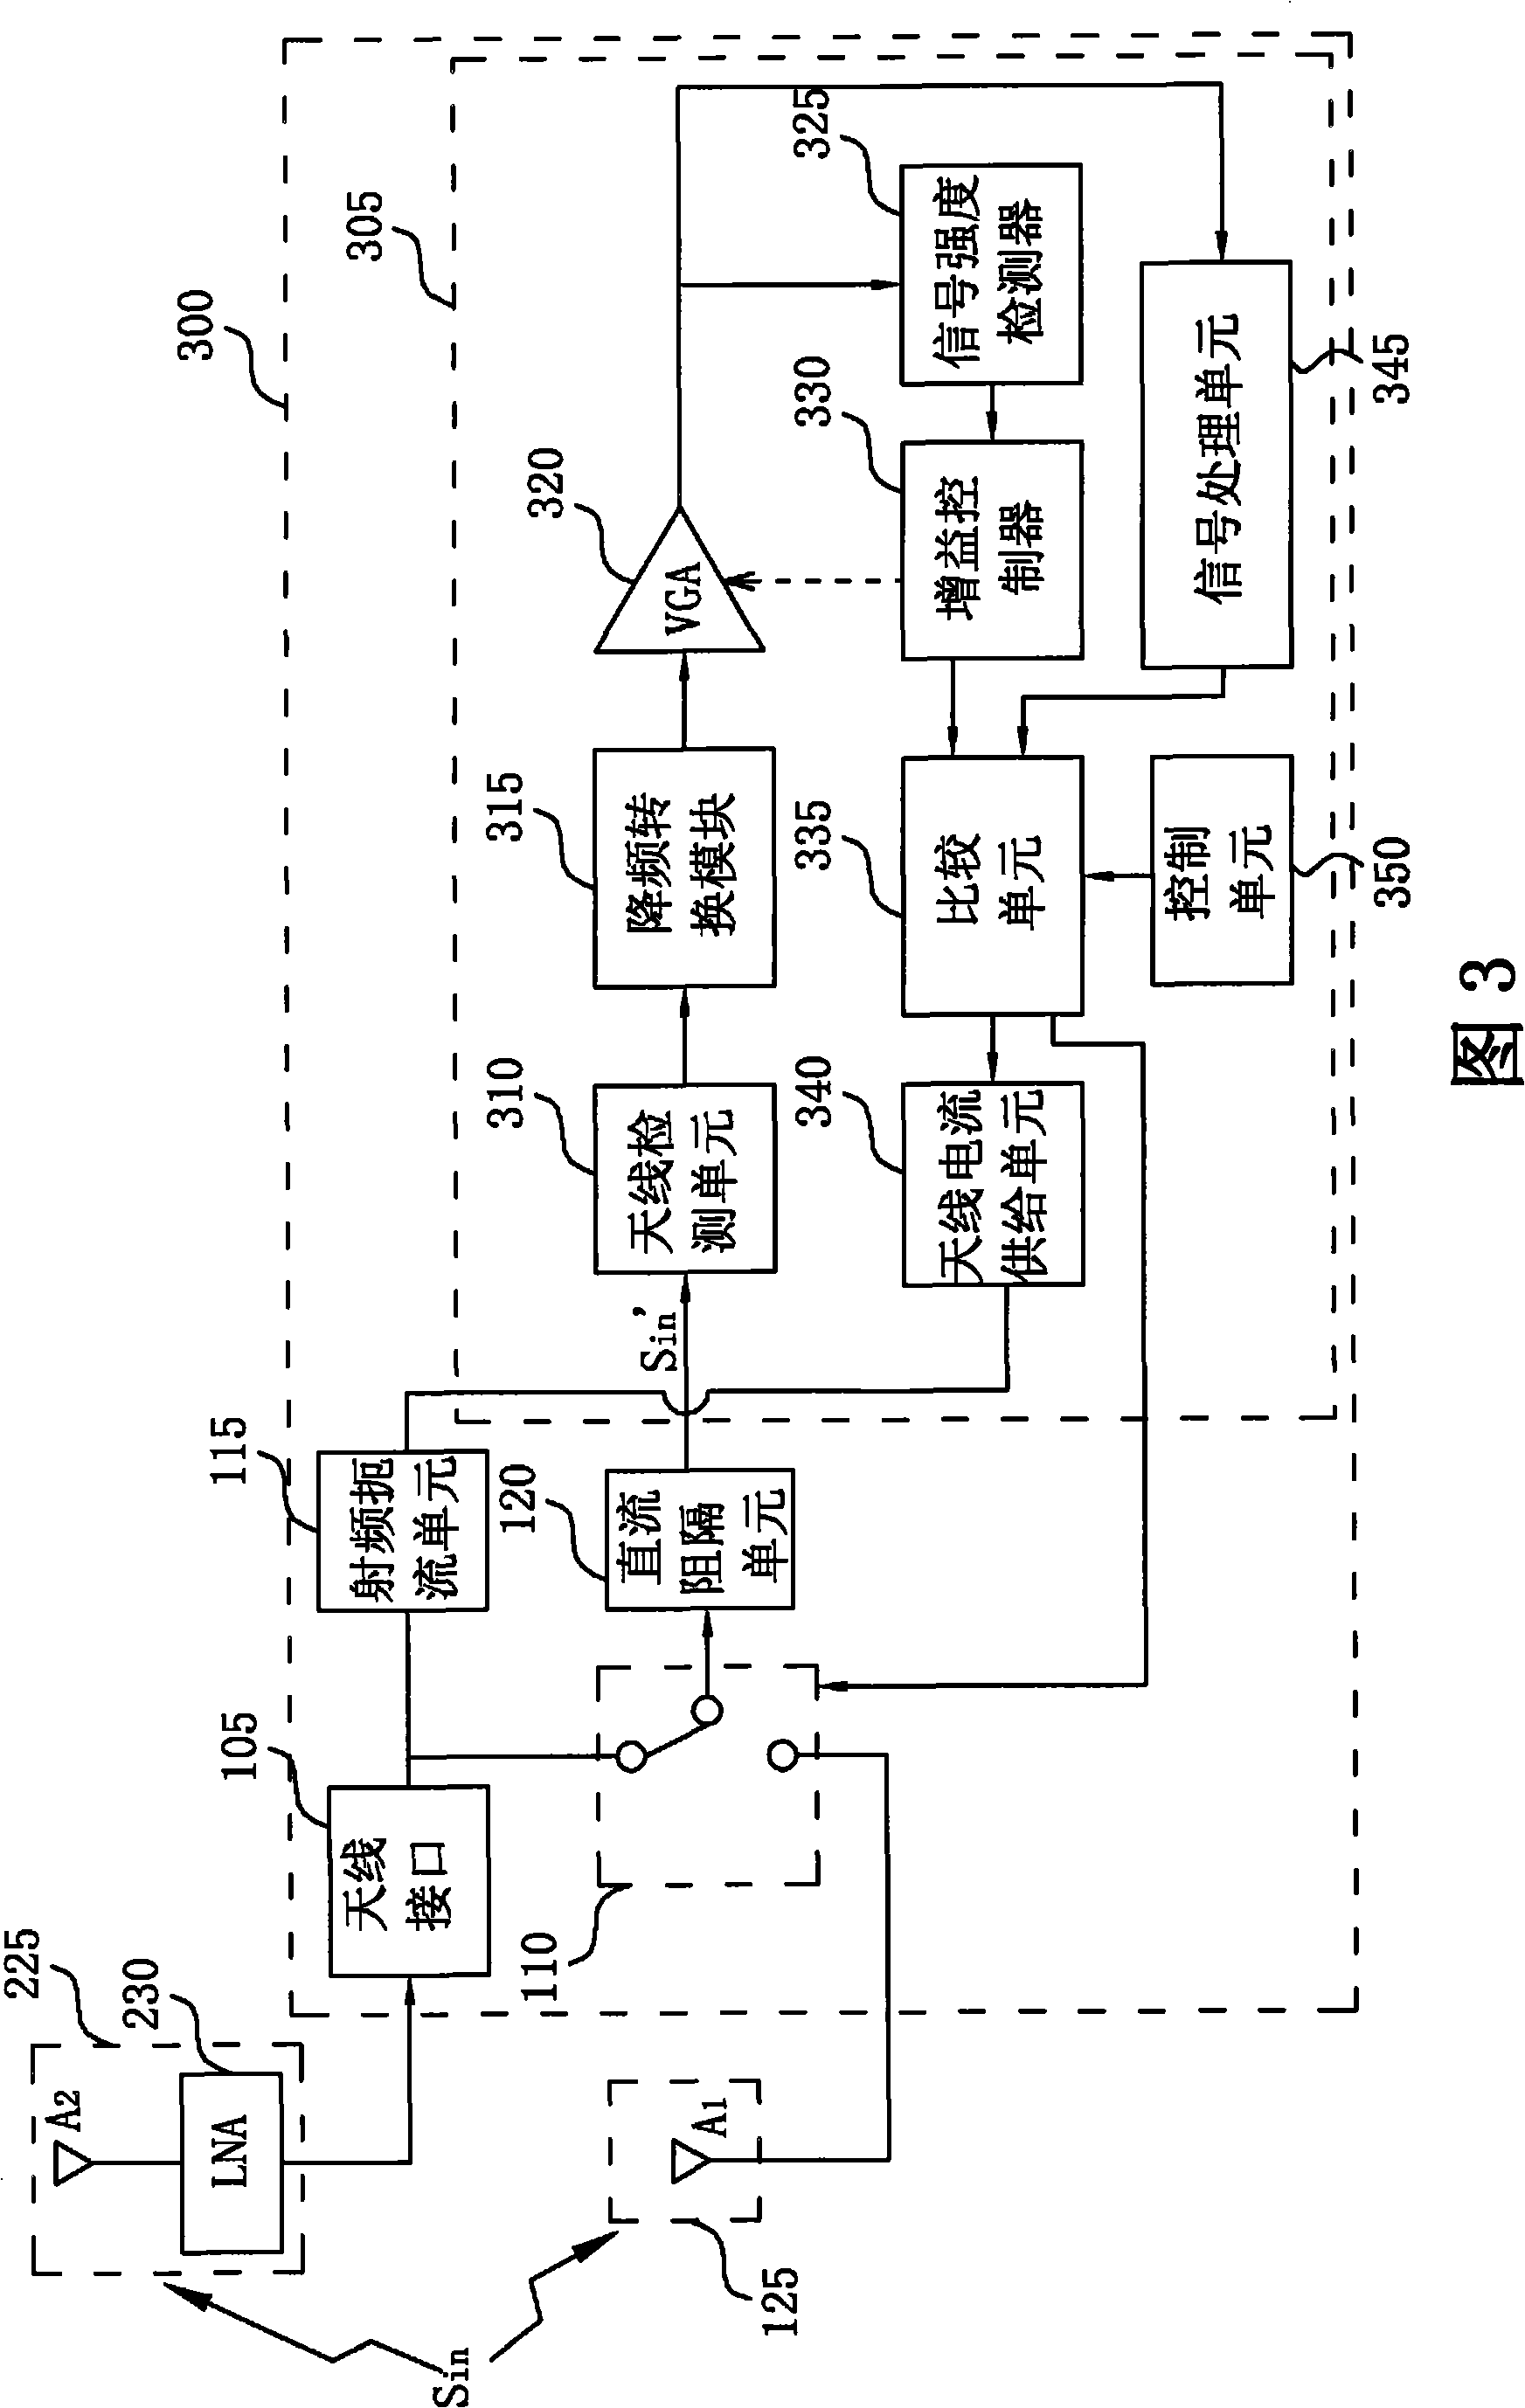 Antenna switching system and related method